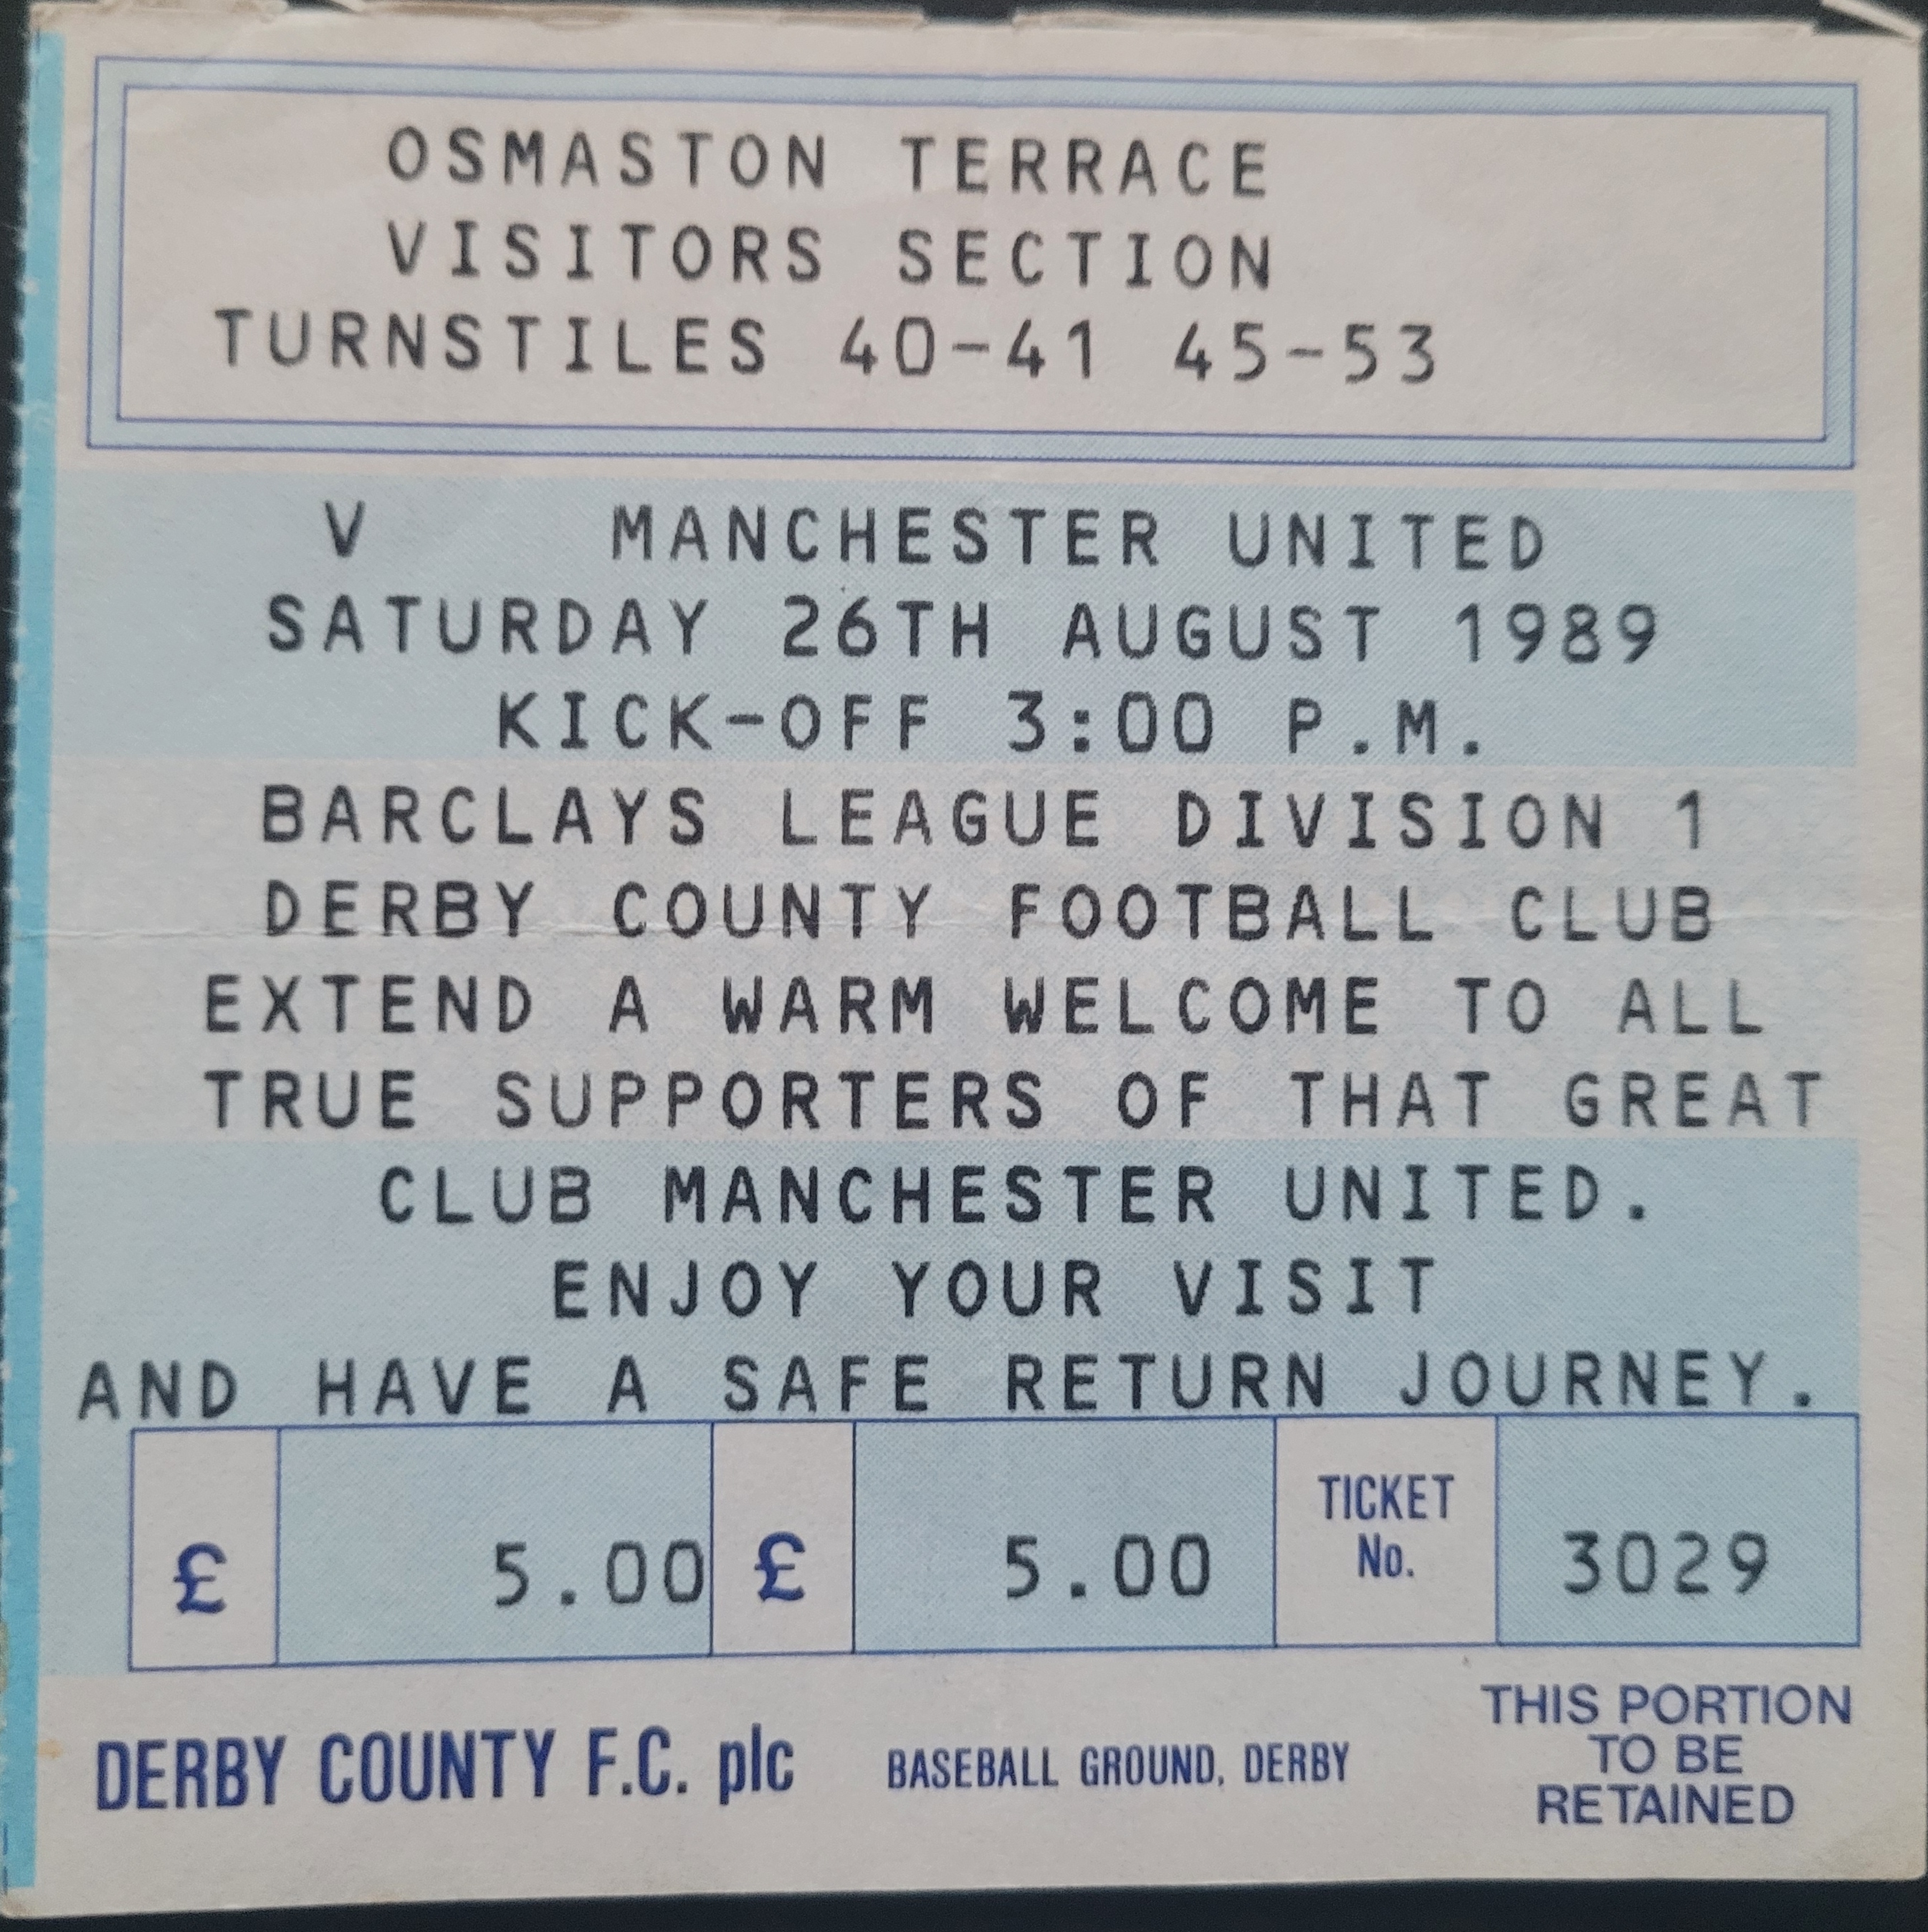 1989-90 DERBY COUNTY V MANCHESTER UNITED TICKET